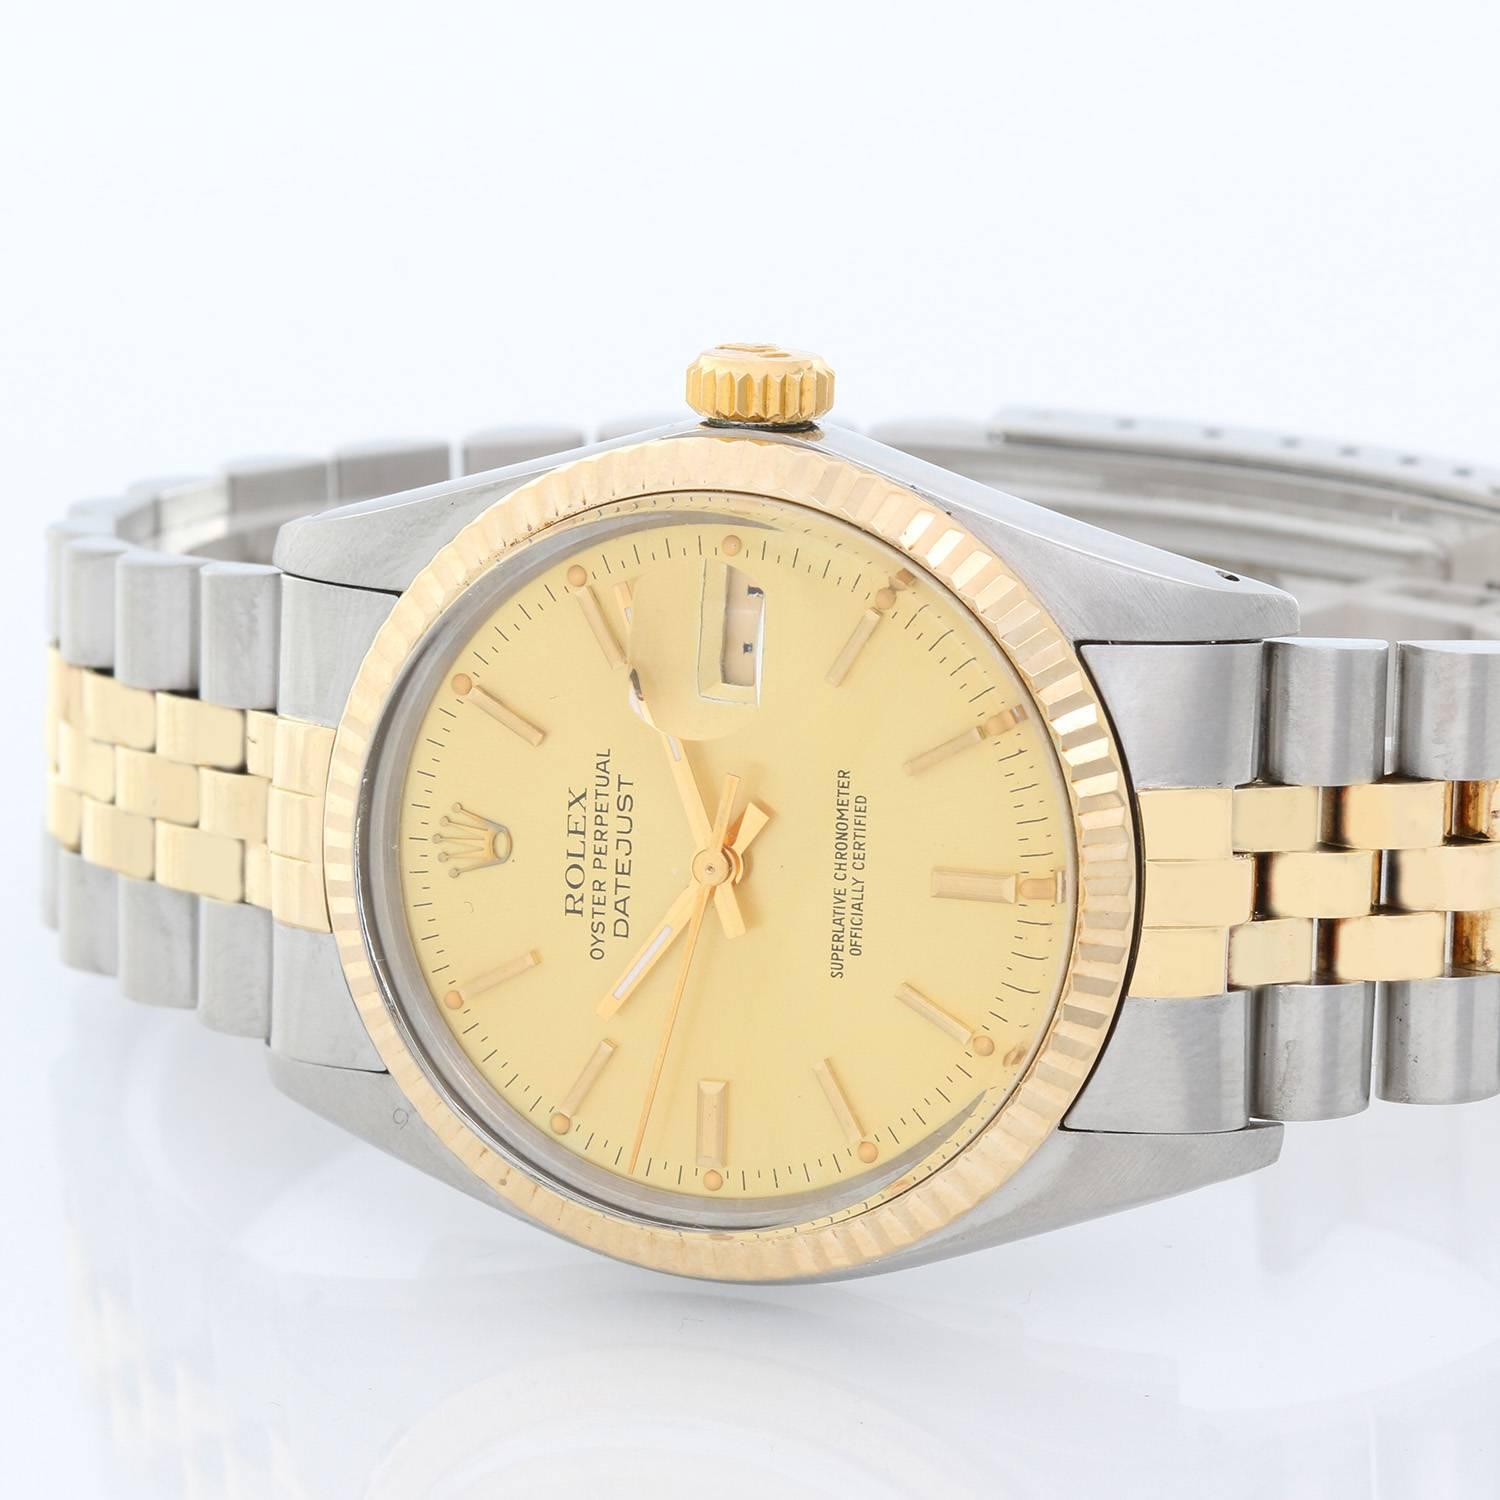 Men's Rolex Datejust 2-Tone Watch 16013 -  Automatic winding, 27 jewels, Quickset, acrylic crystal. Stainless steel and 18k yellow gold fluted bezel  (36mm diameter). Champagne dial with stick markers. Stainless steel and 18k yellow gold Jubilee